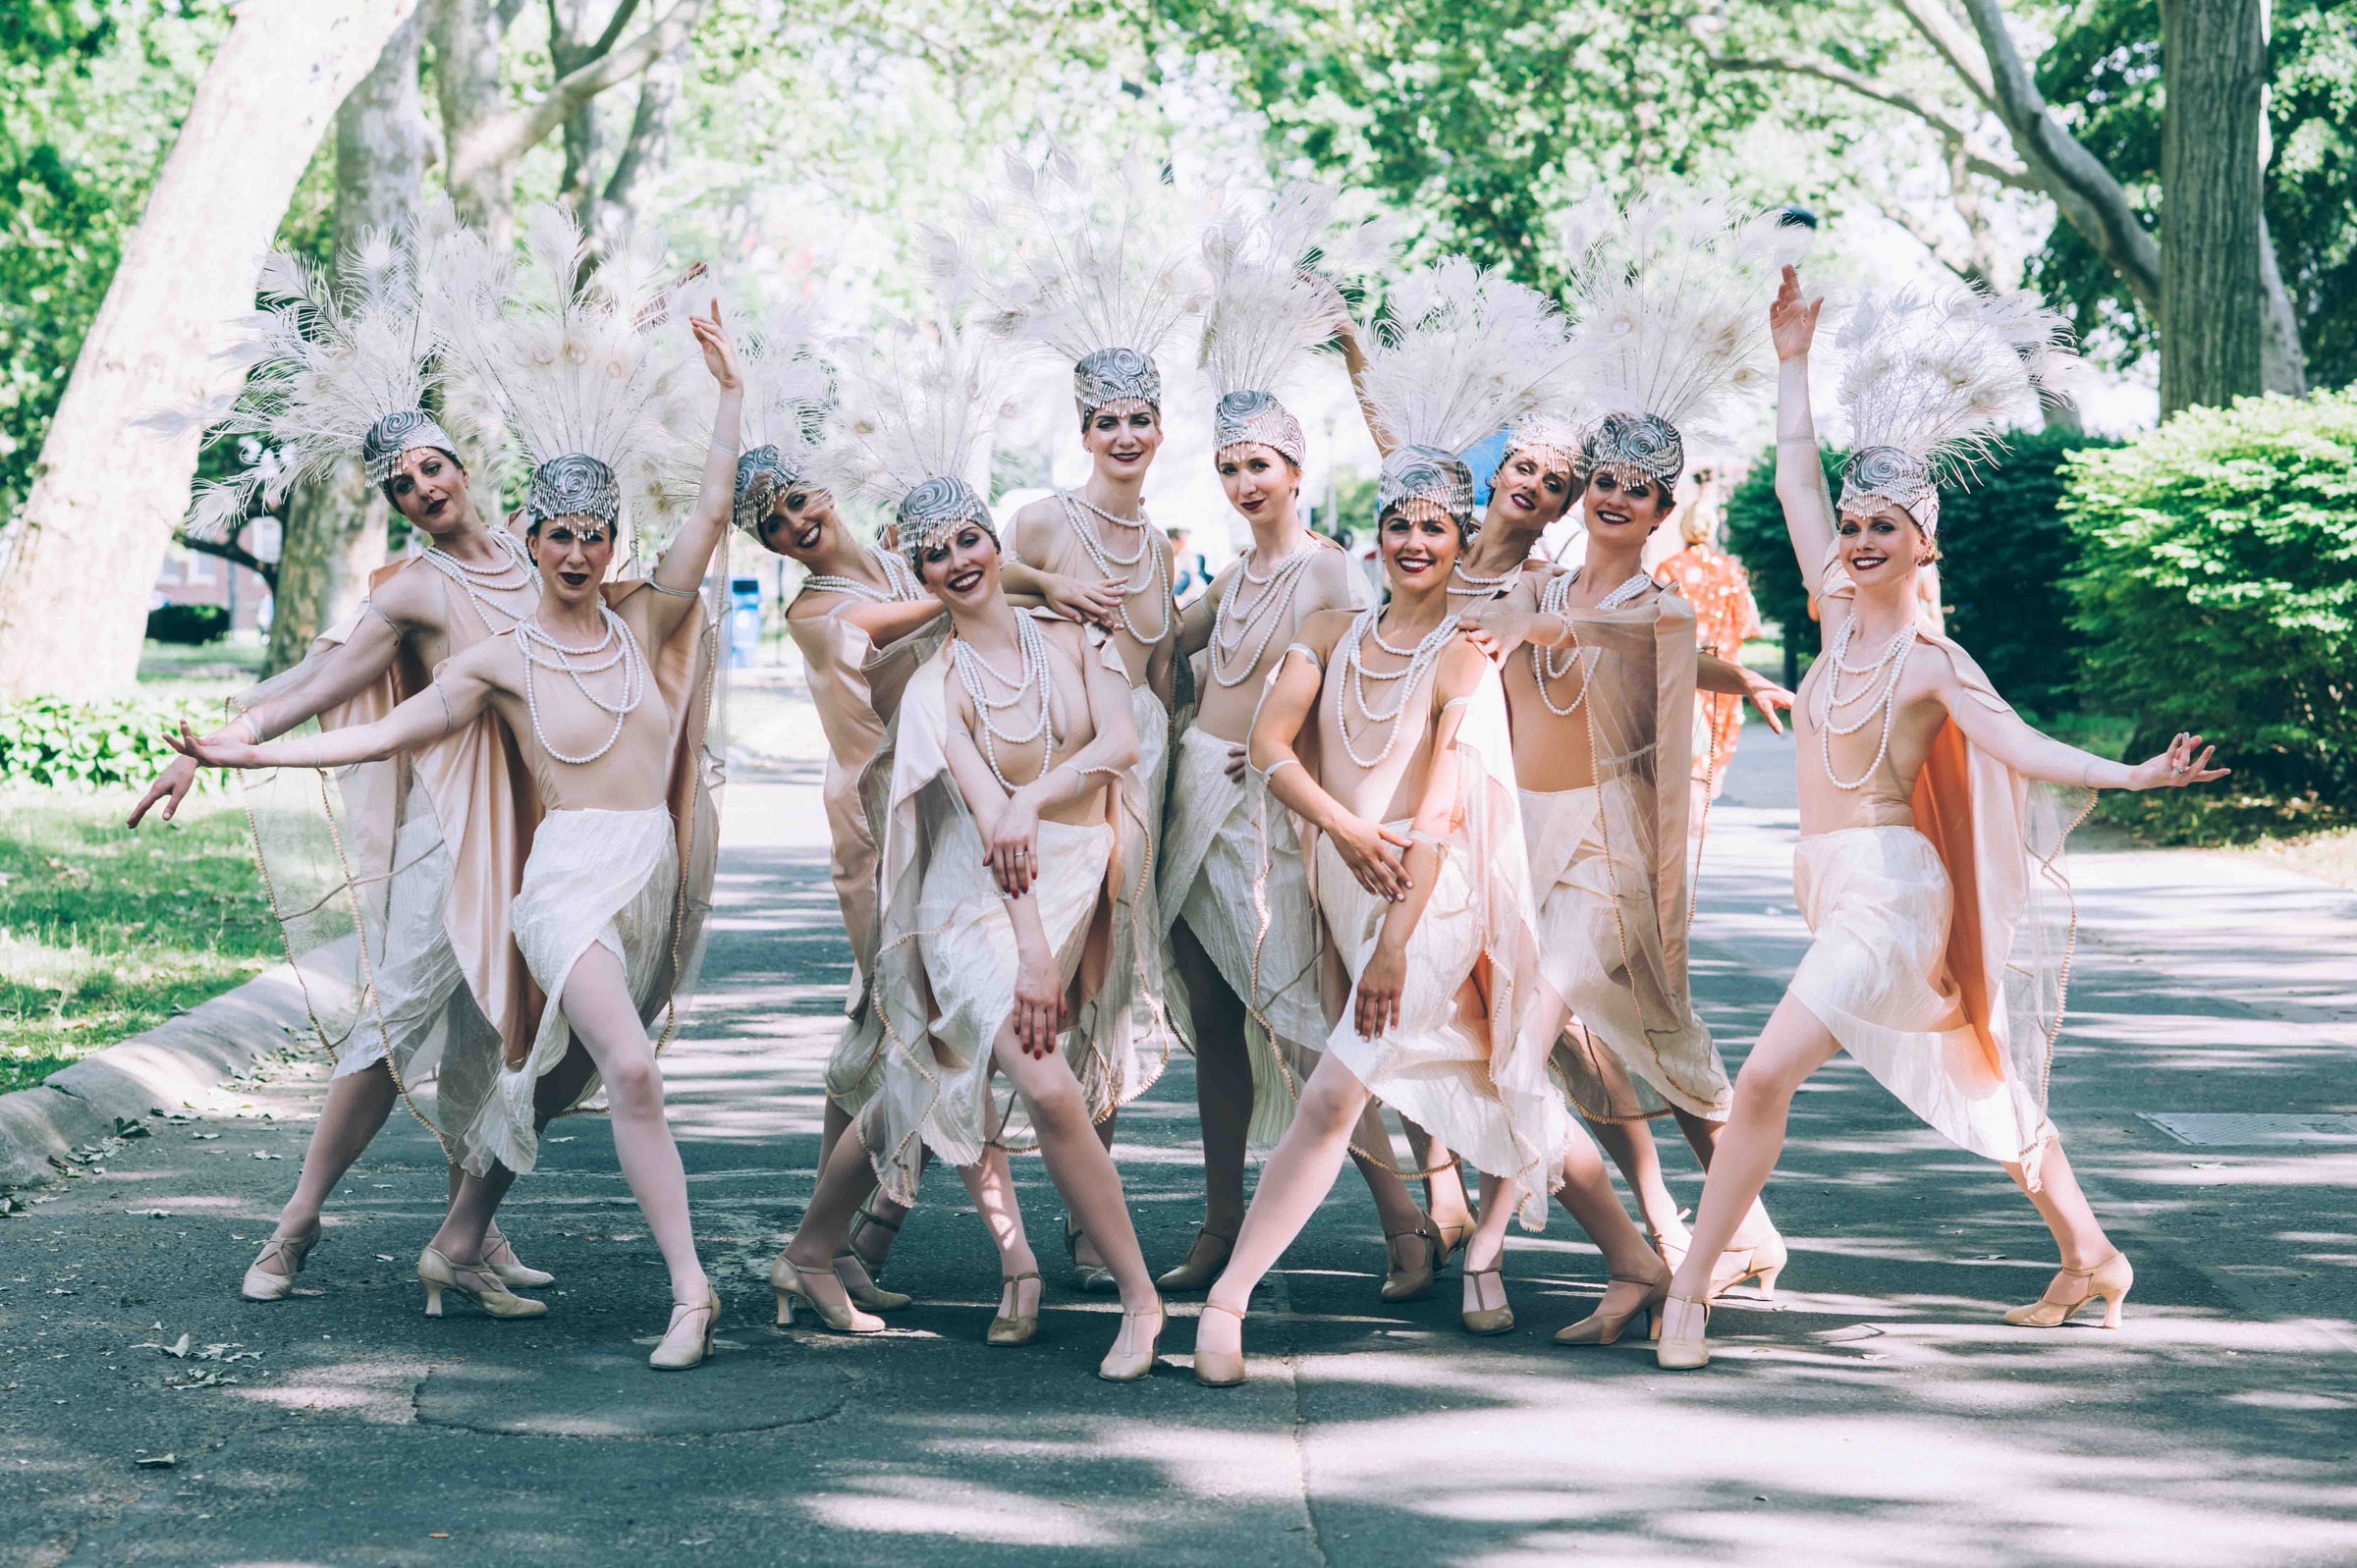 THE 15TH ANNUAL JAZZ AGE LAWN PARTY  RETURNS TO GOVERNORS ISLAND